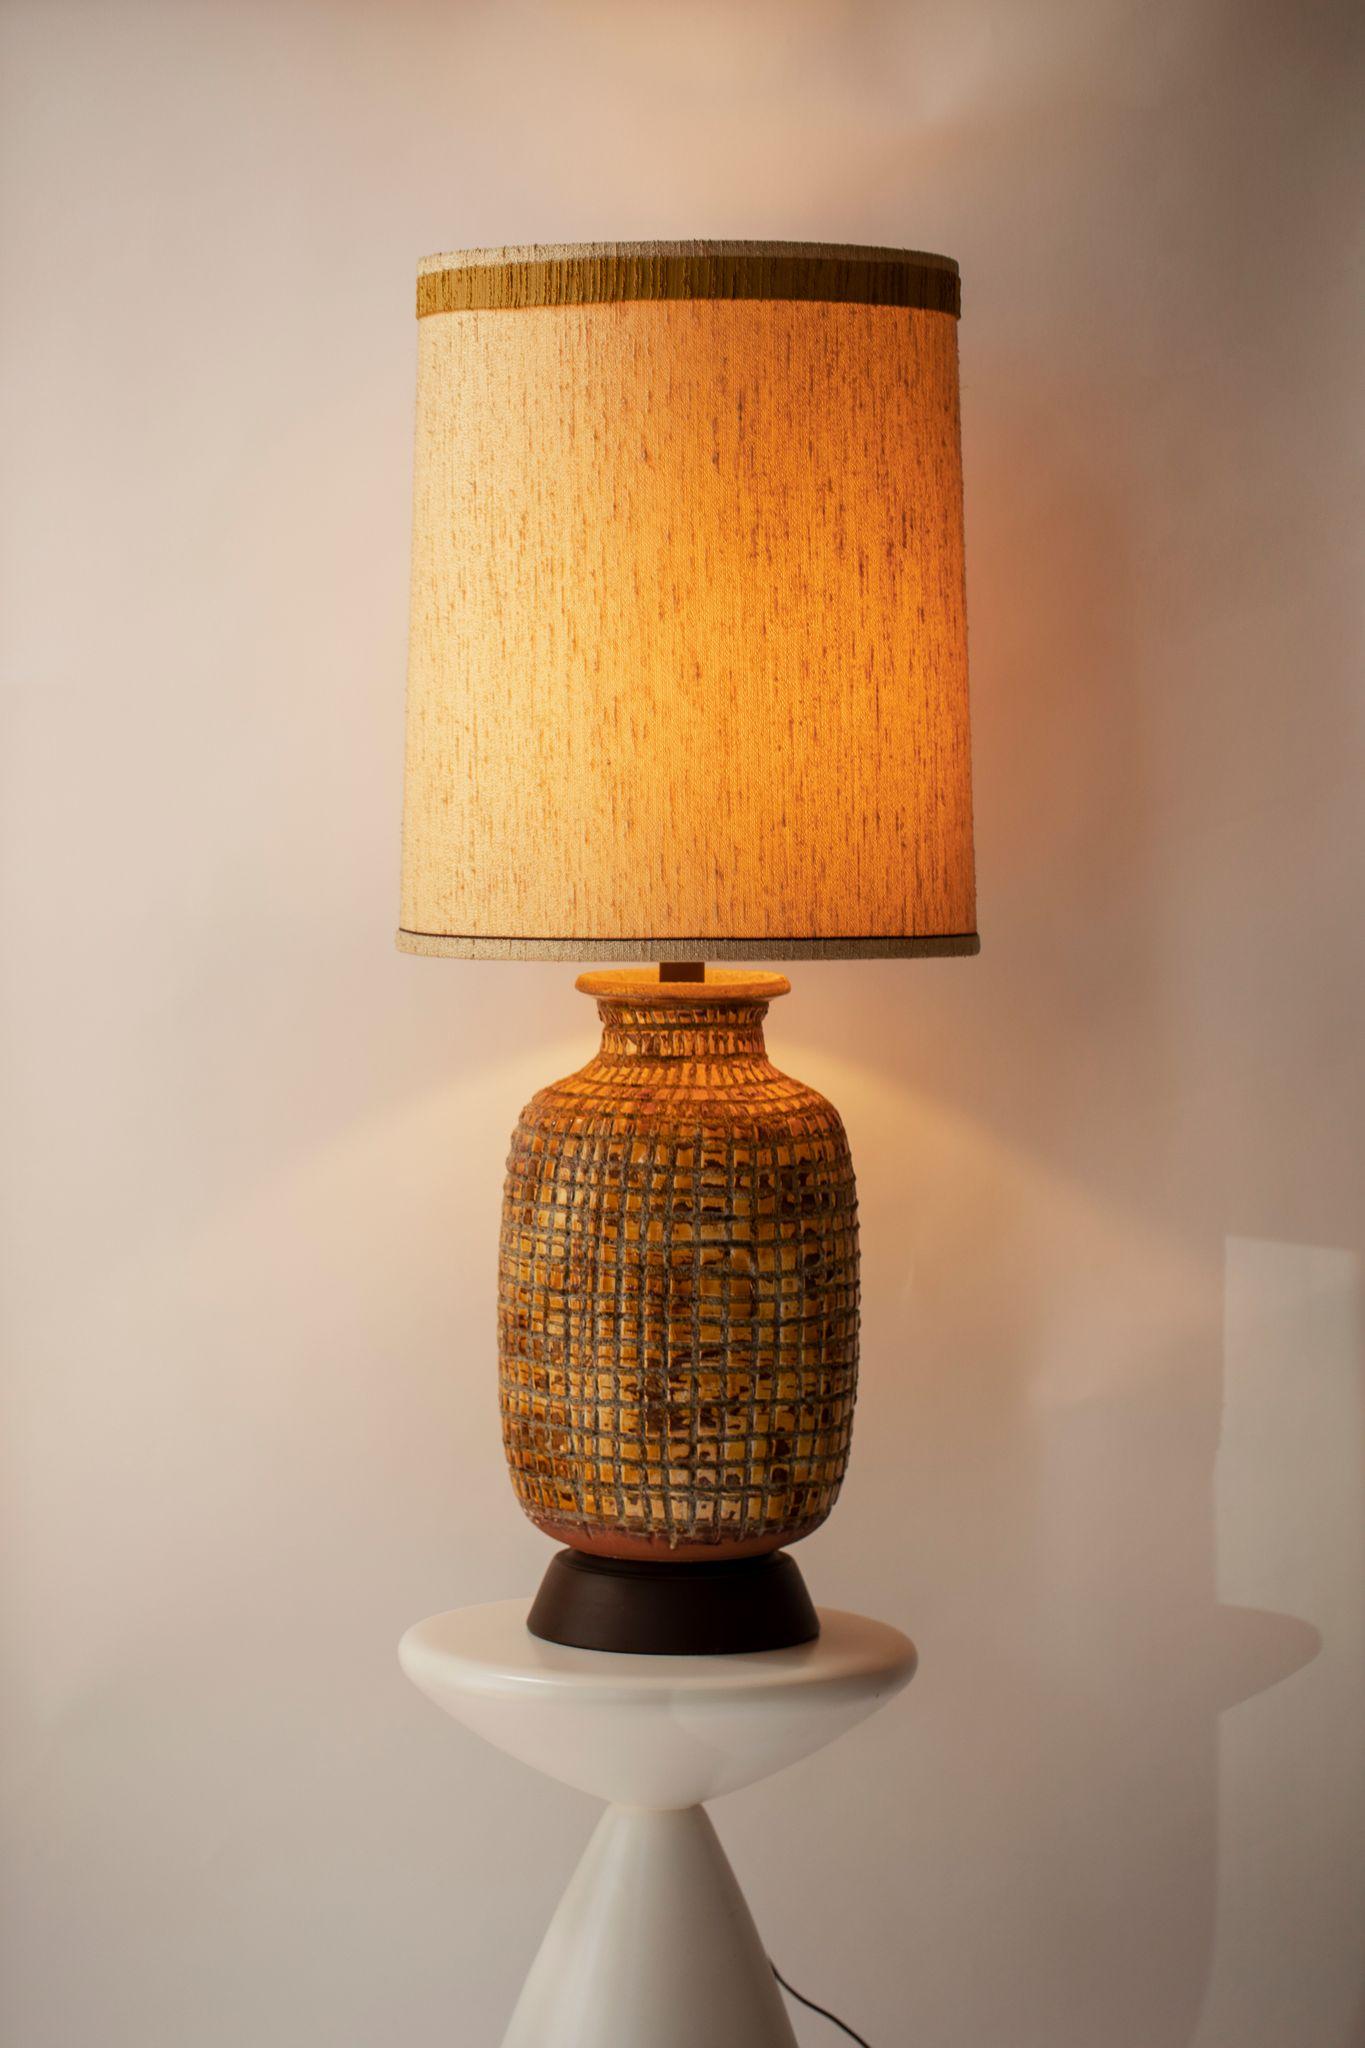 Large brutalist glazed terracotta lamp with original textured shade.

Dimensions listed are the overall dimensions of the lamp plus the shade, as pictured.